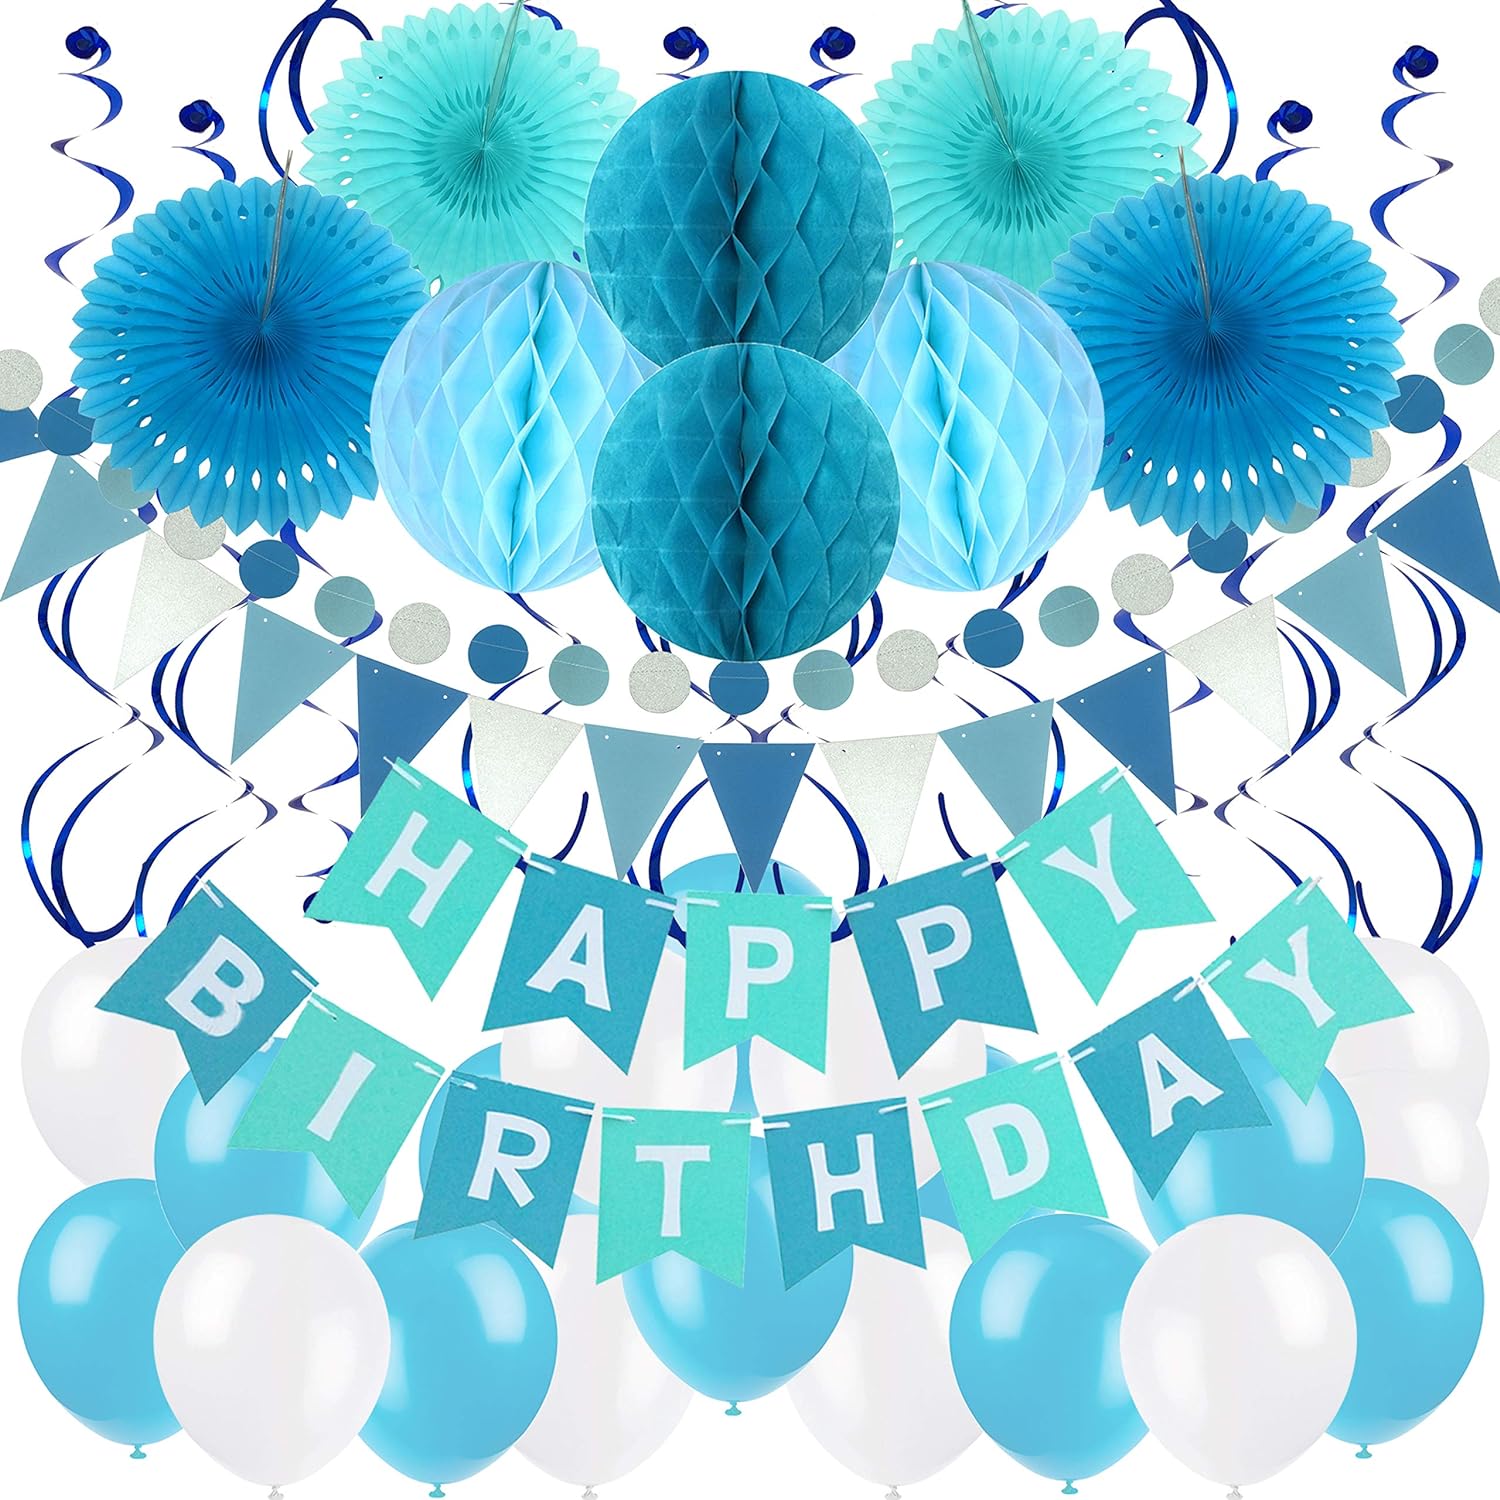 ZERODECO Birthday Party Decoration, Happy Birthday Banner with Paper Fans, Honeycomb Balls, Triangular Pennants, Circle Paper Garland, Hanging Swirls and Balloons - Blue, Sky Blue and White